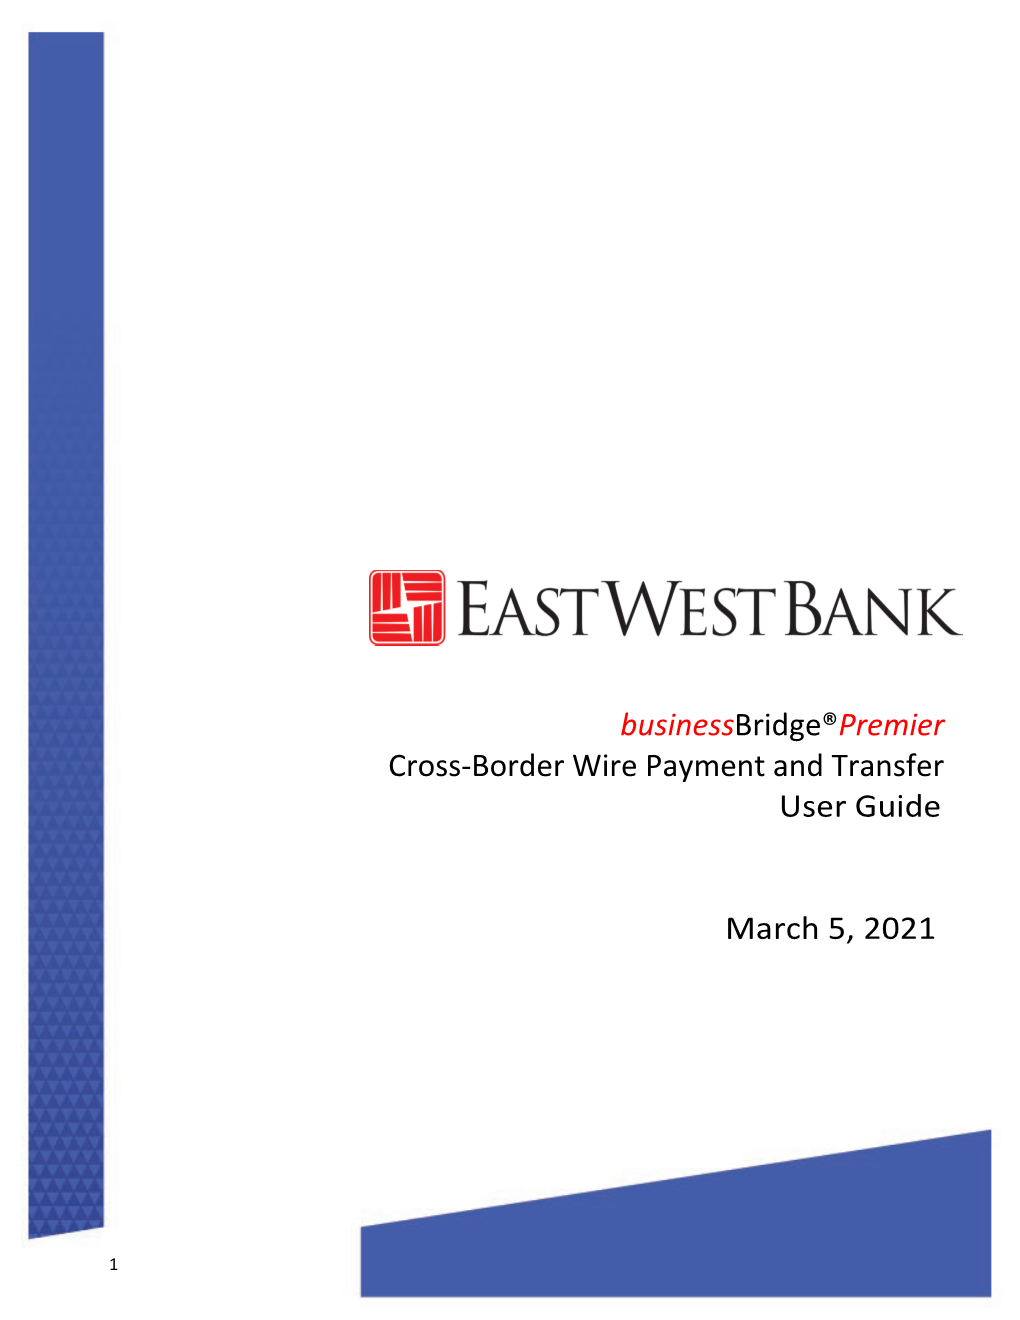 Businessbridge®Premier Cross-Border Wire Payment and Transfer User Guide